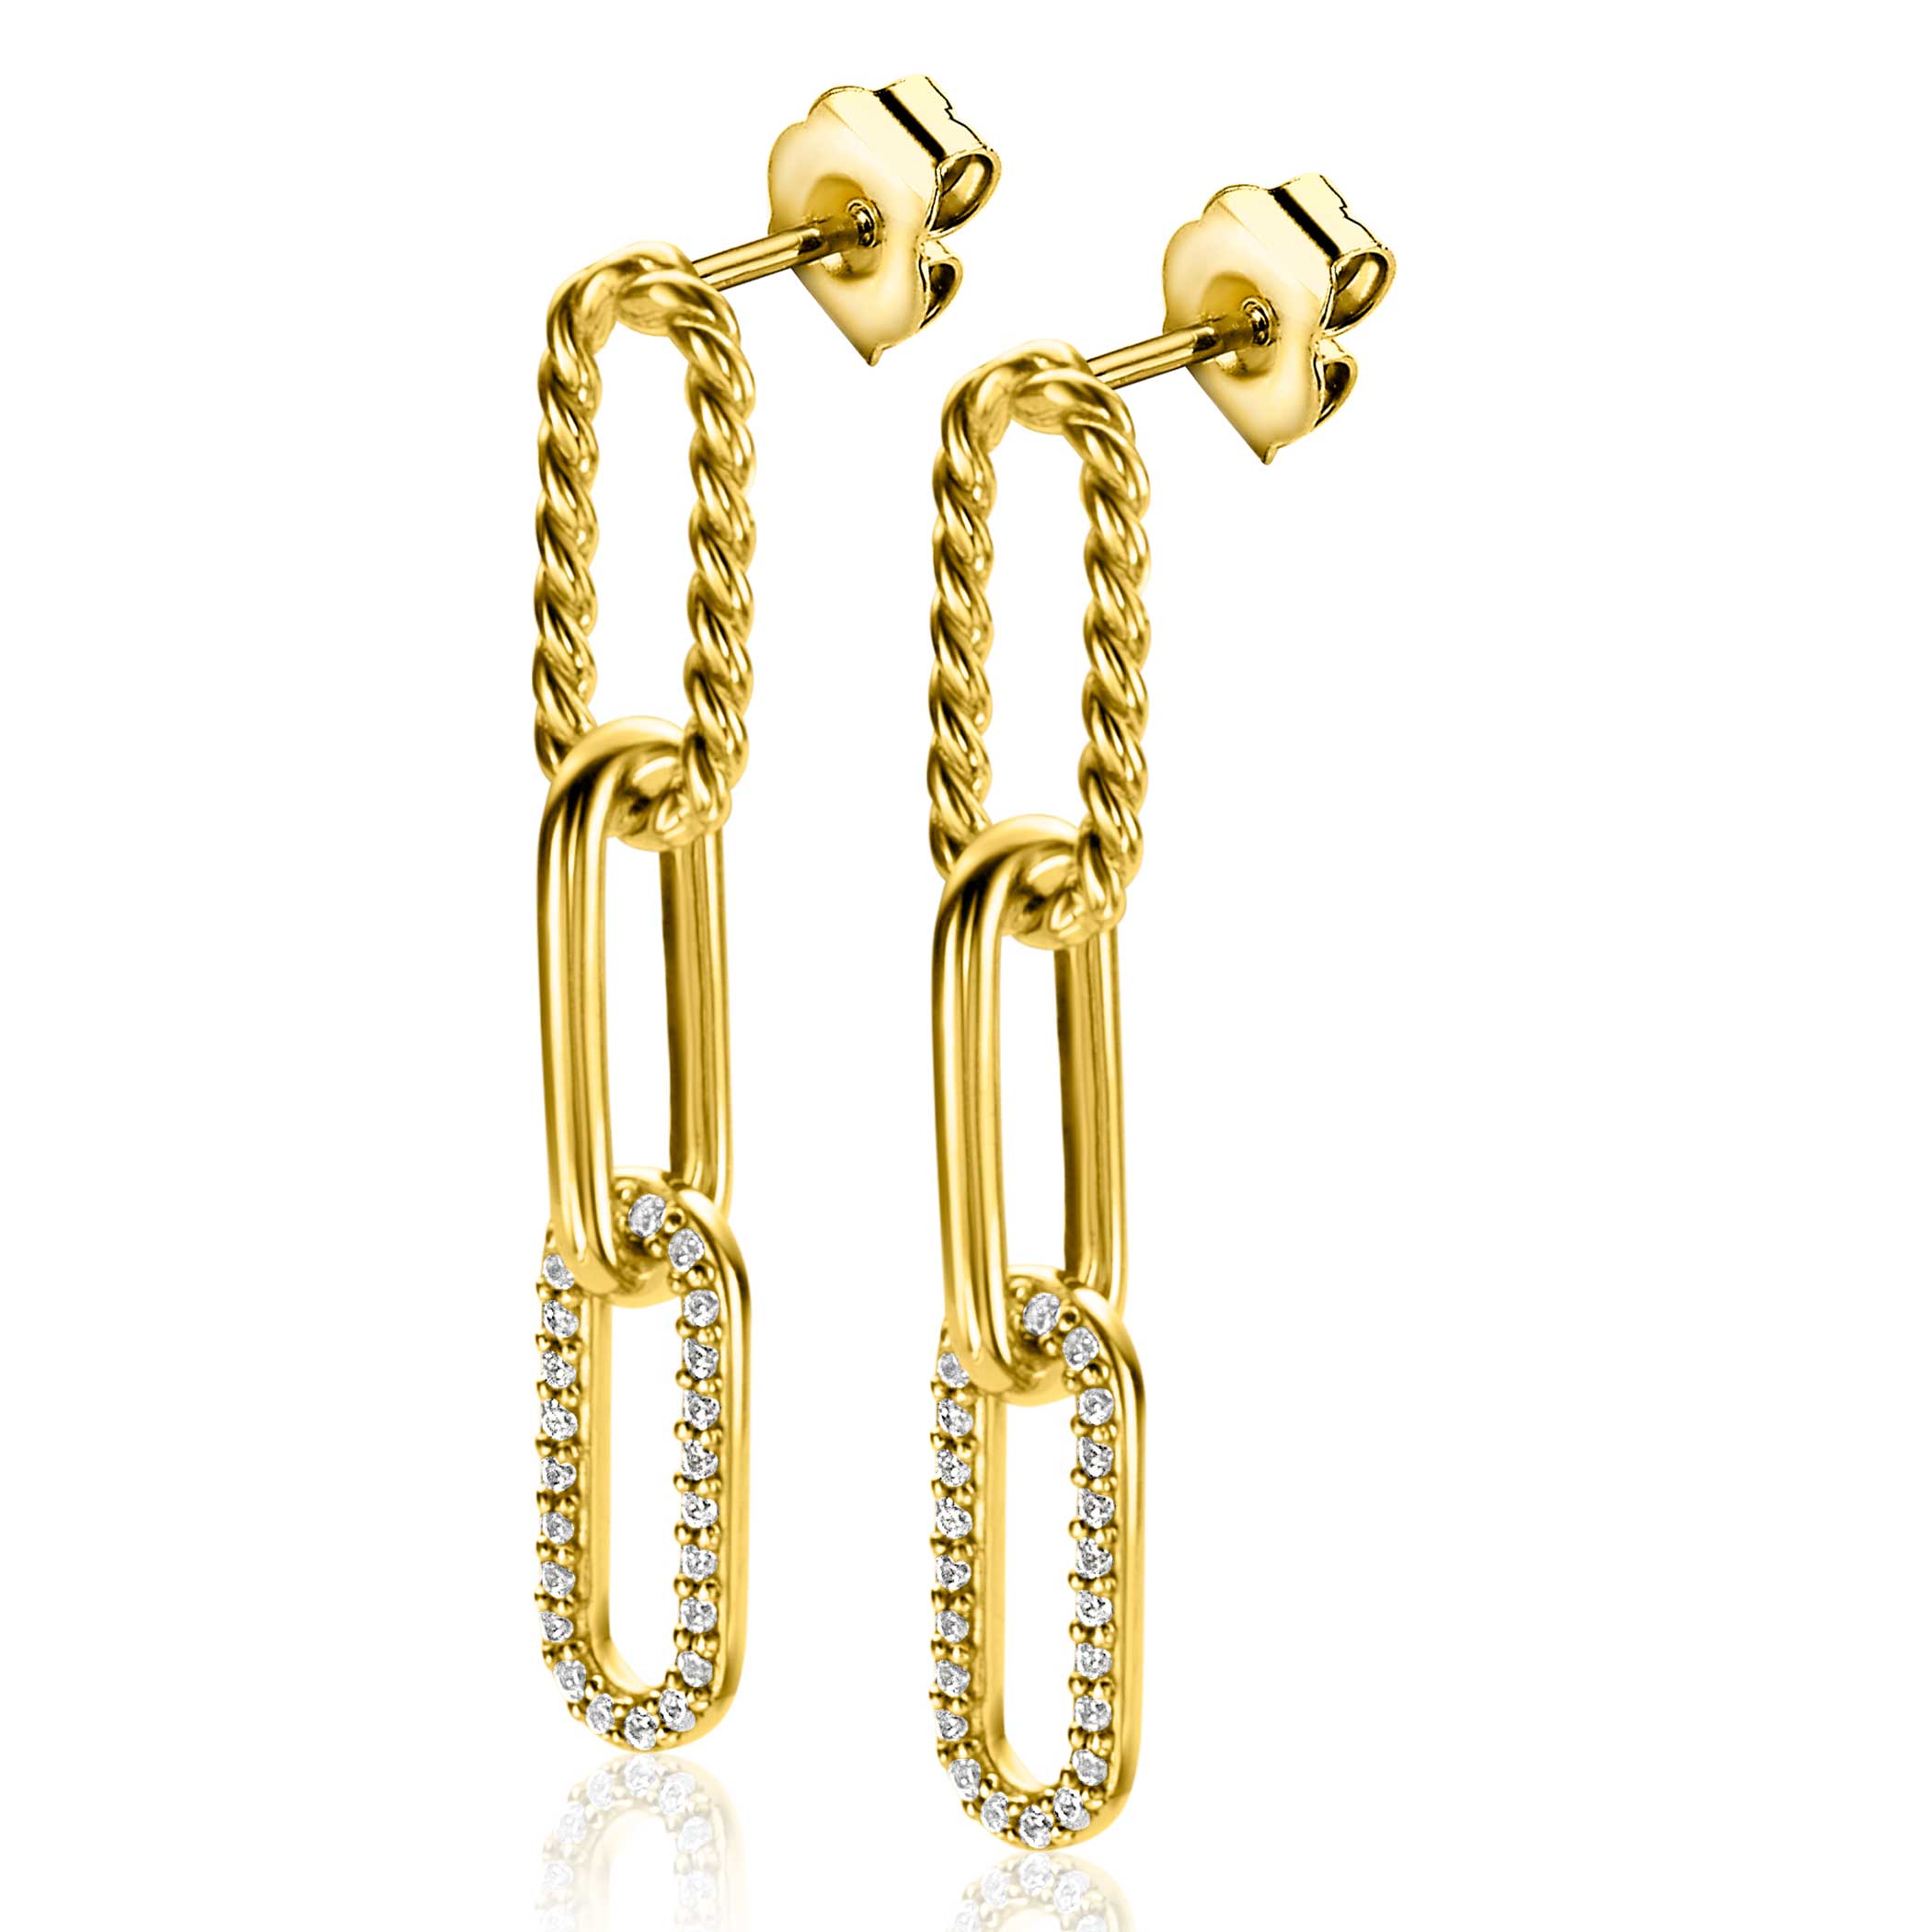 30mm ZINZI Gold Plated Sterling Silver Long Earrings with 3 Paperclip Chains: Smooth, Twist Design and White Zirconias ZIO2330Y